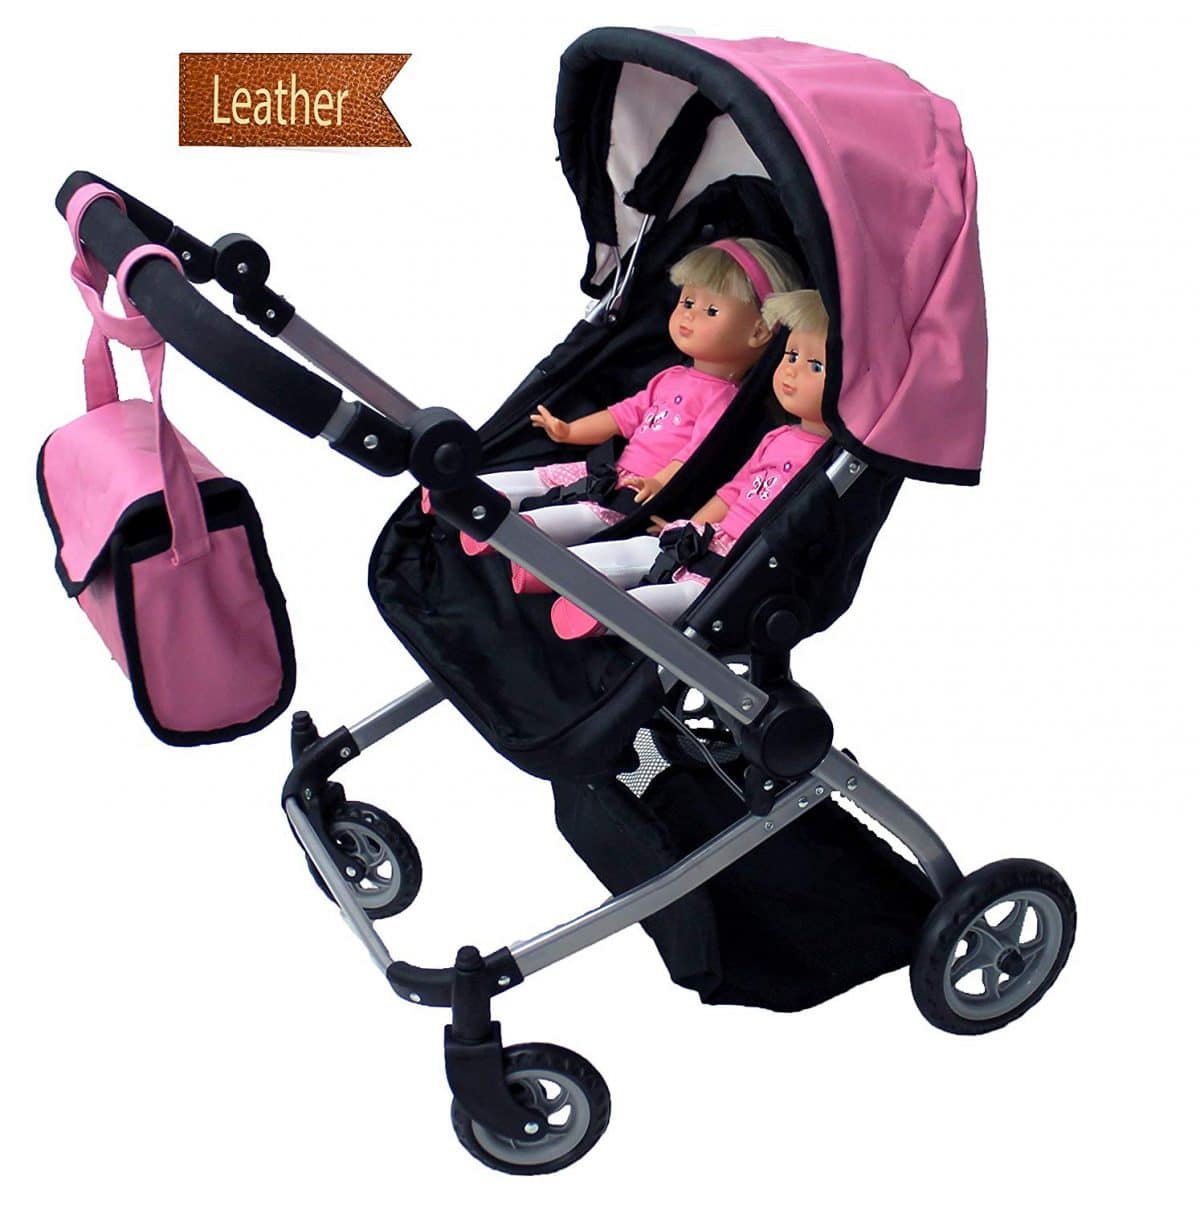 double baby stroller toy